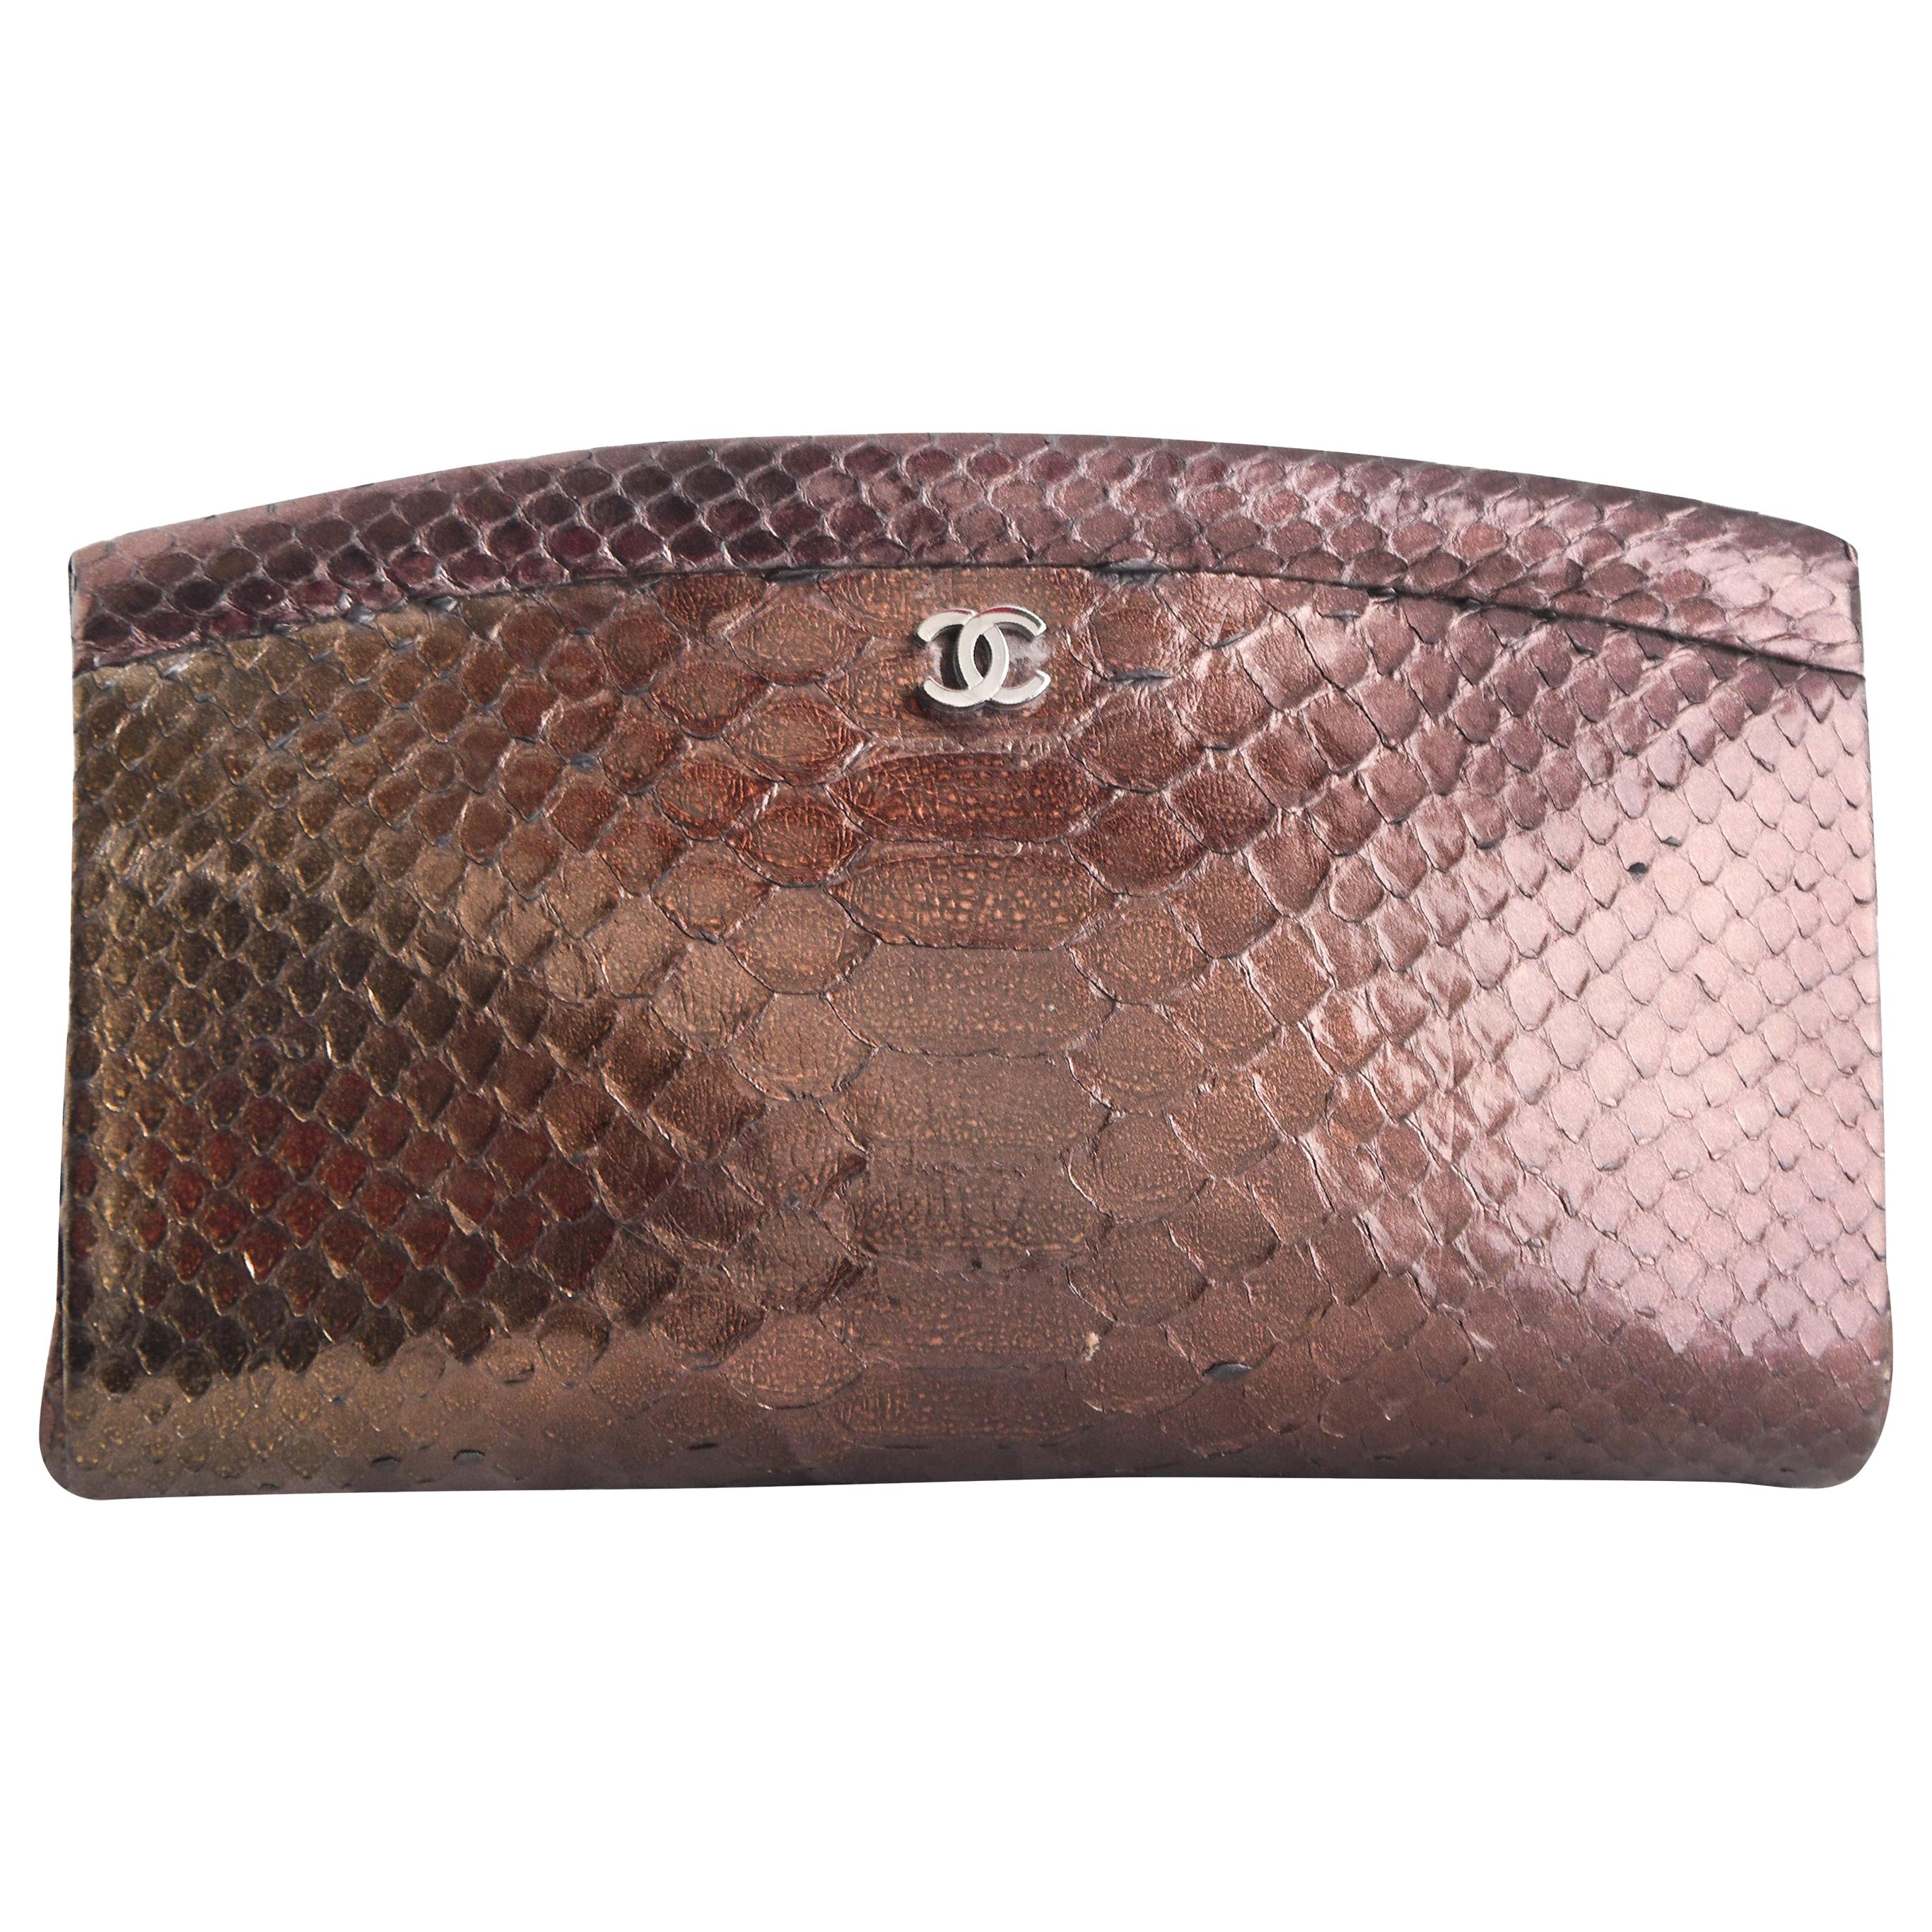 Chanel Python Metallic Bronze Clutch With Top Closure For Sale